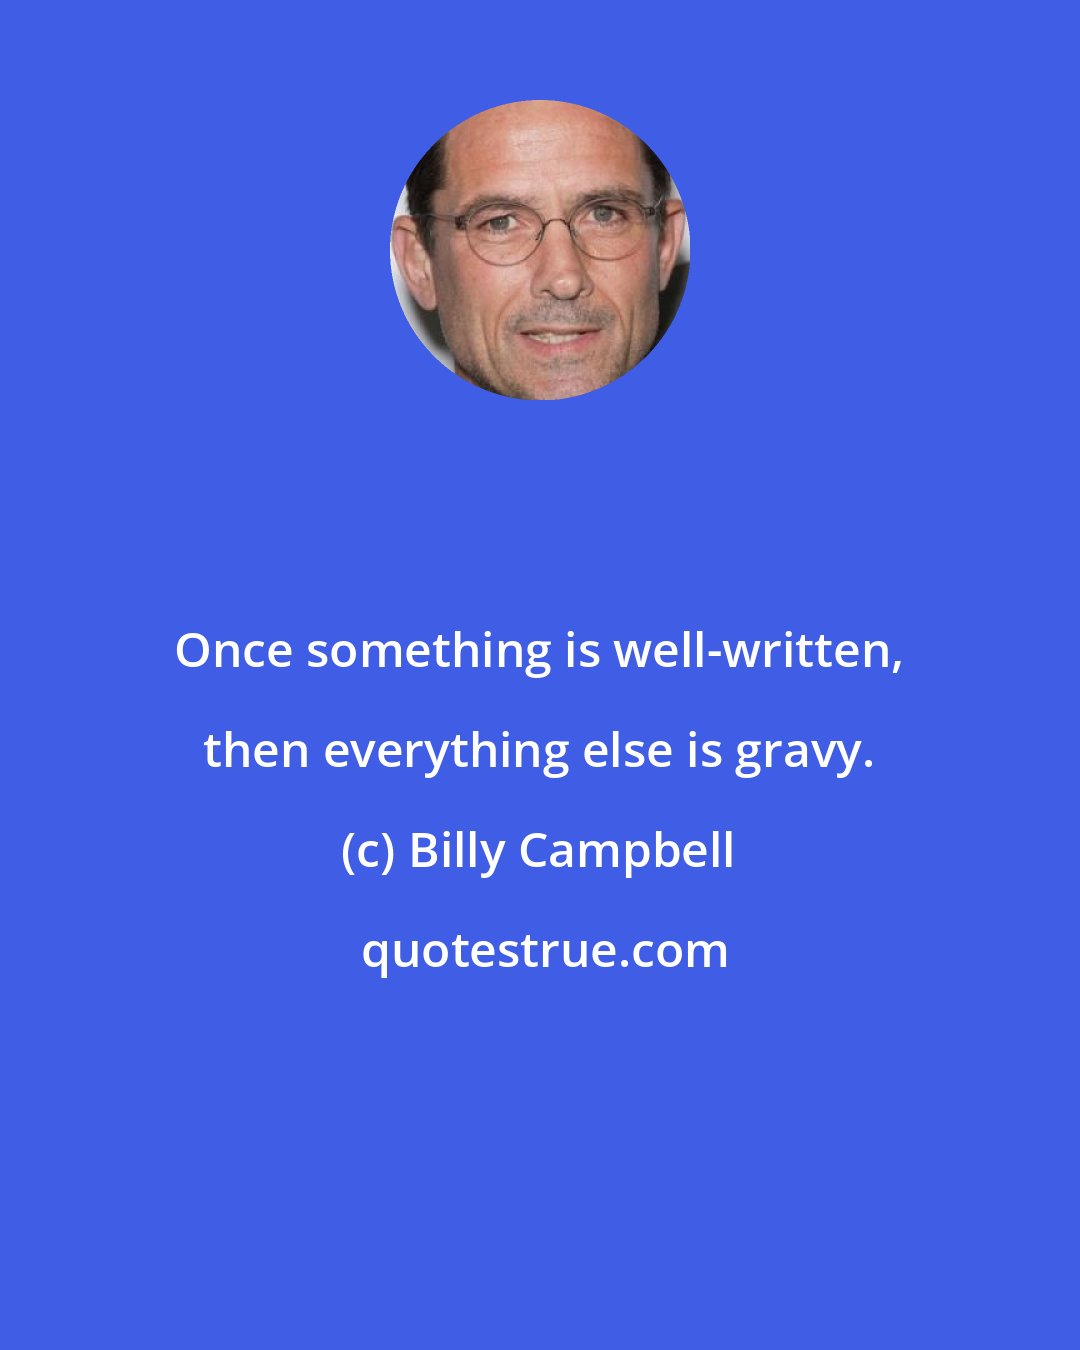 Billy Campbell: Once something is well-written, then everything else is gravy.